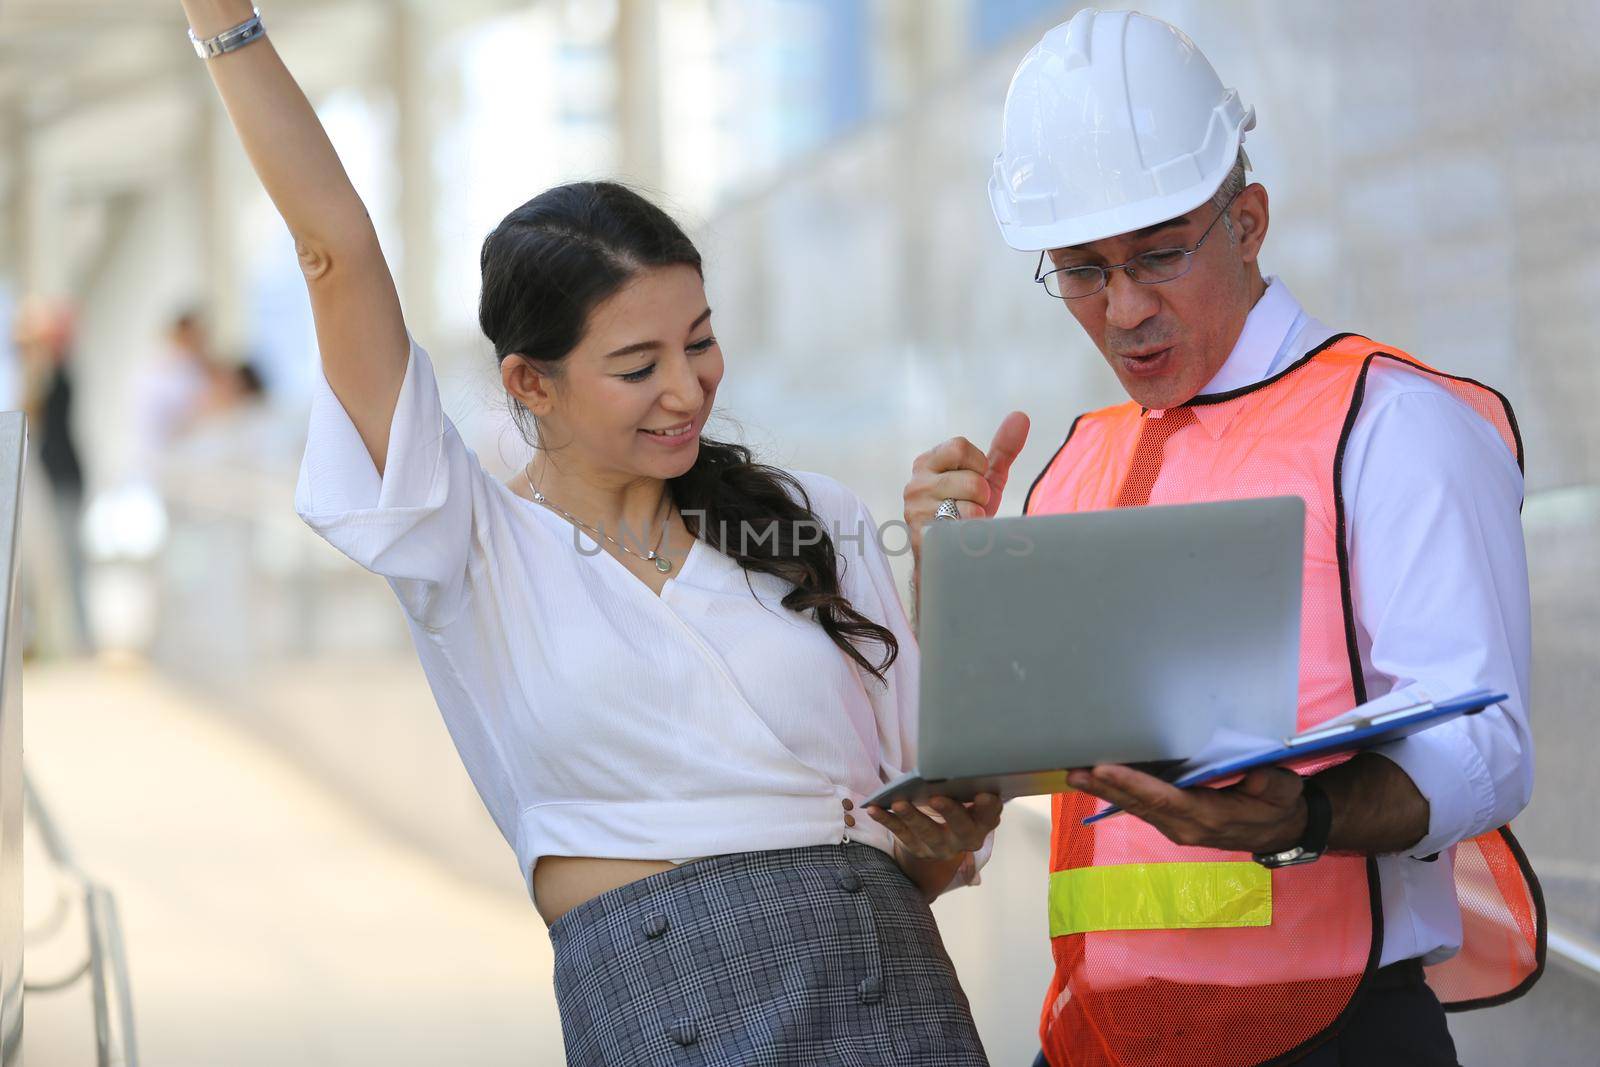 Construction engineers discussion with architects at construction site or building site